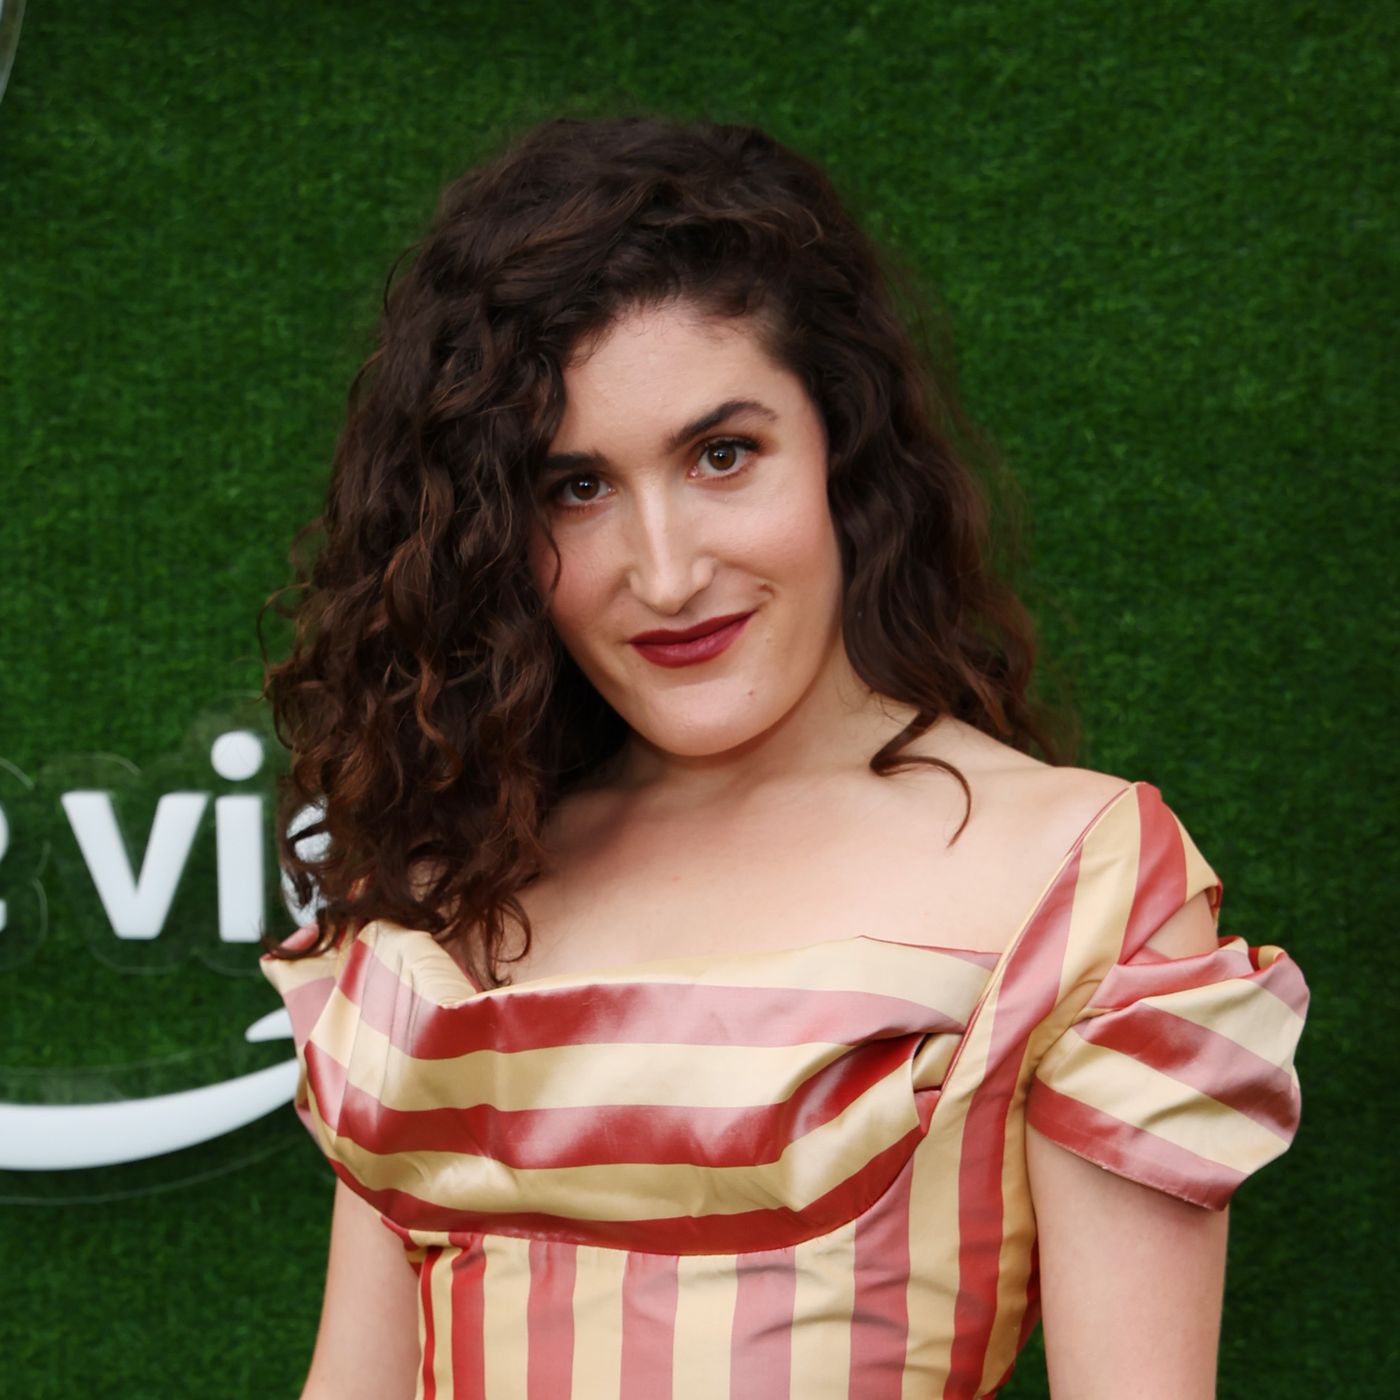 pakke repertoire vogn FX Enters Comedy With Kate Berlant, Byron Bowers Specials